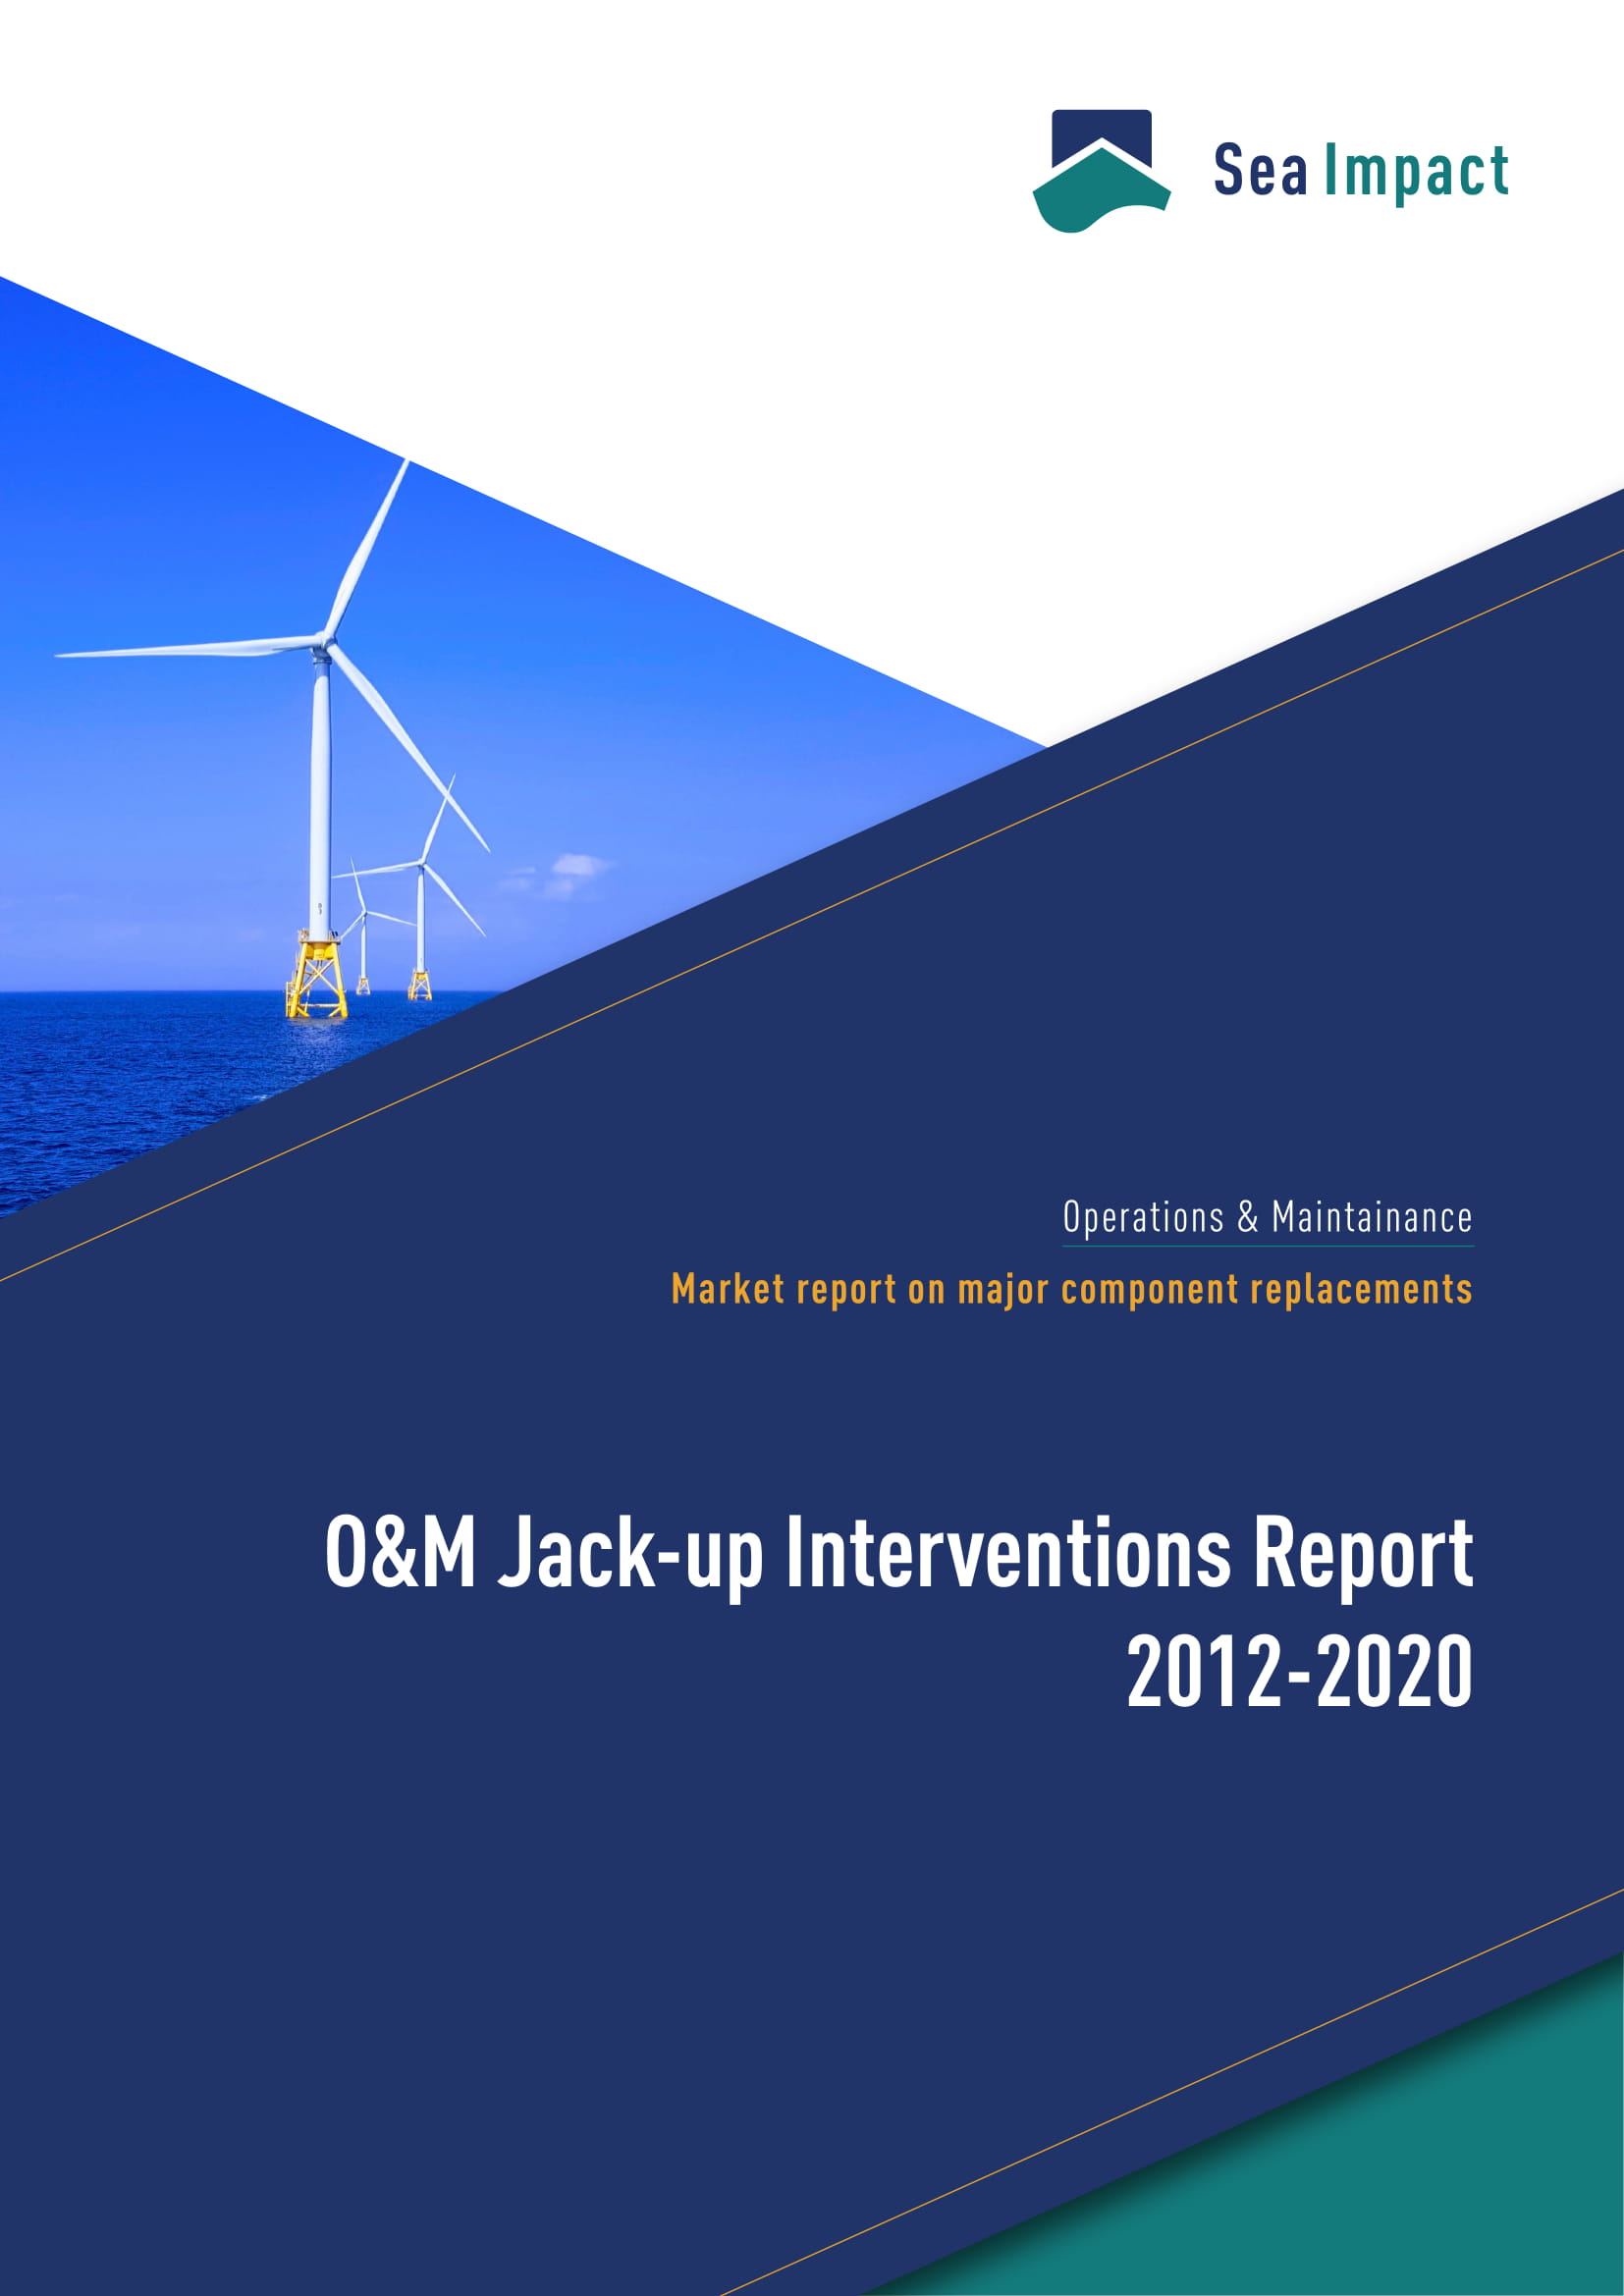 Launch of Our New Market Report on O&M Jack-up Interventions